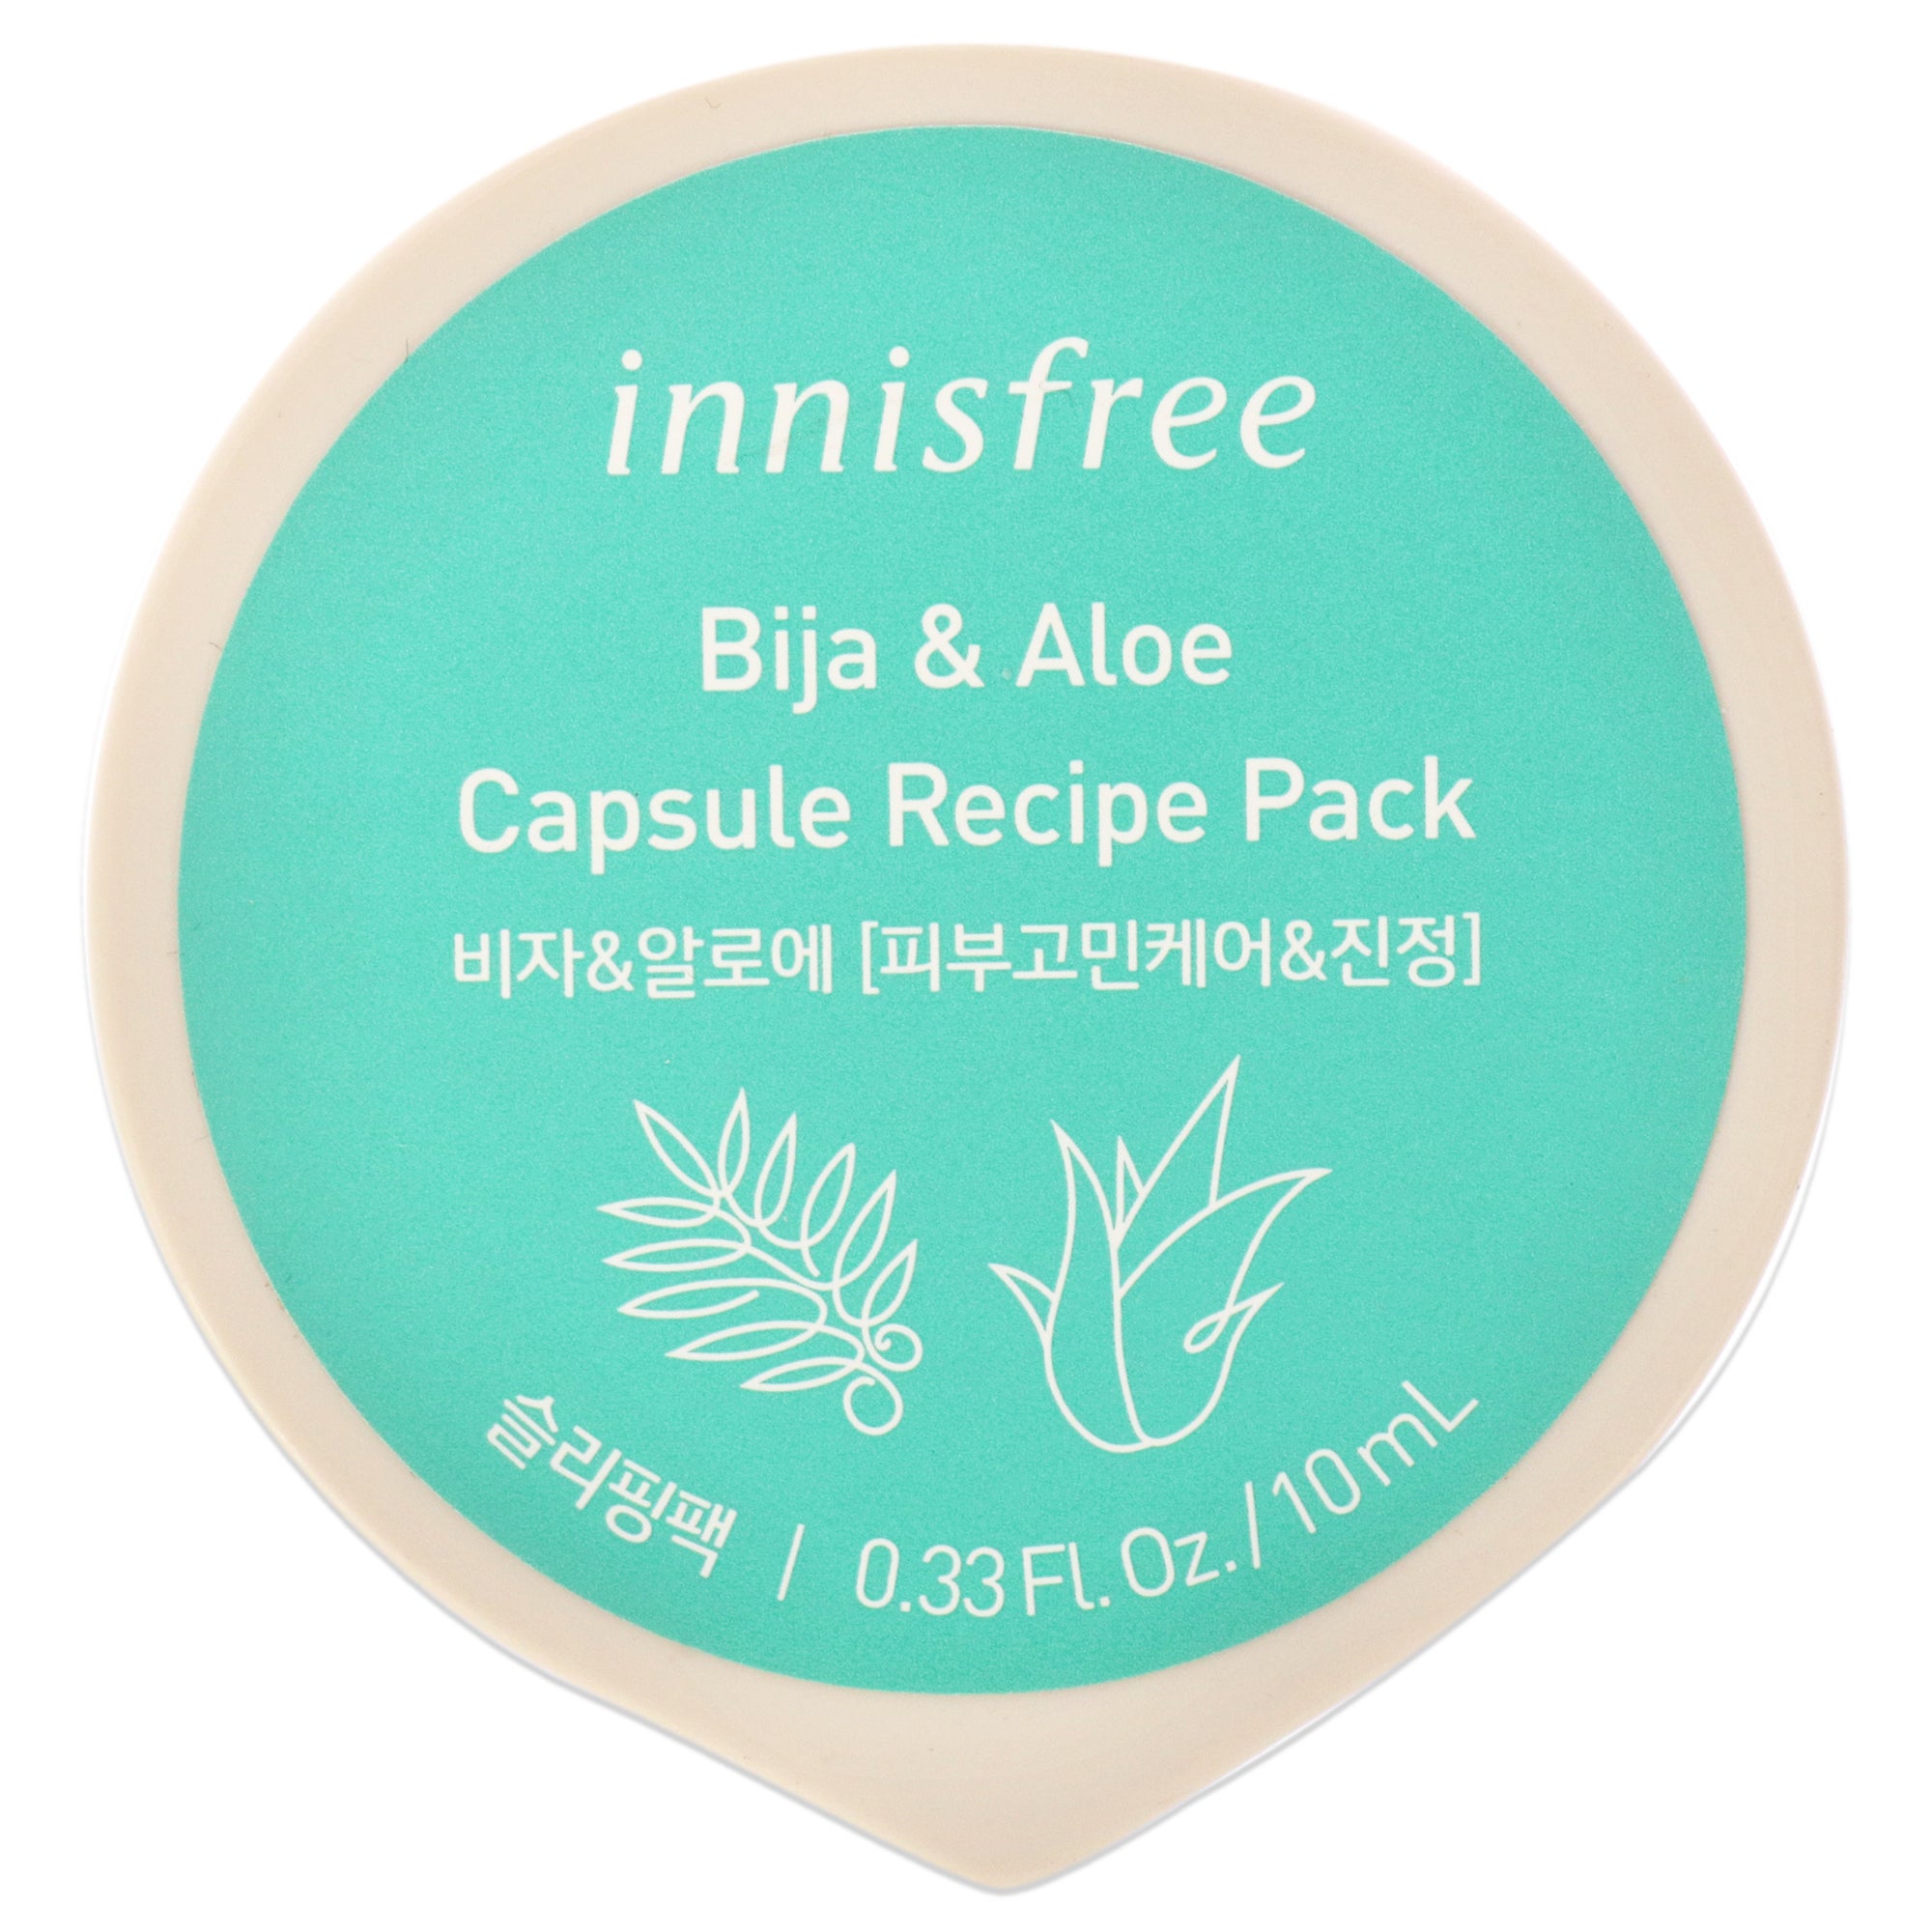 Capsule Recipe Pack Mask - Bija and Aloe by Innisfree for Unisex - 0.33 oz Mask